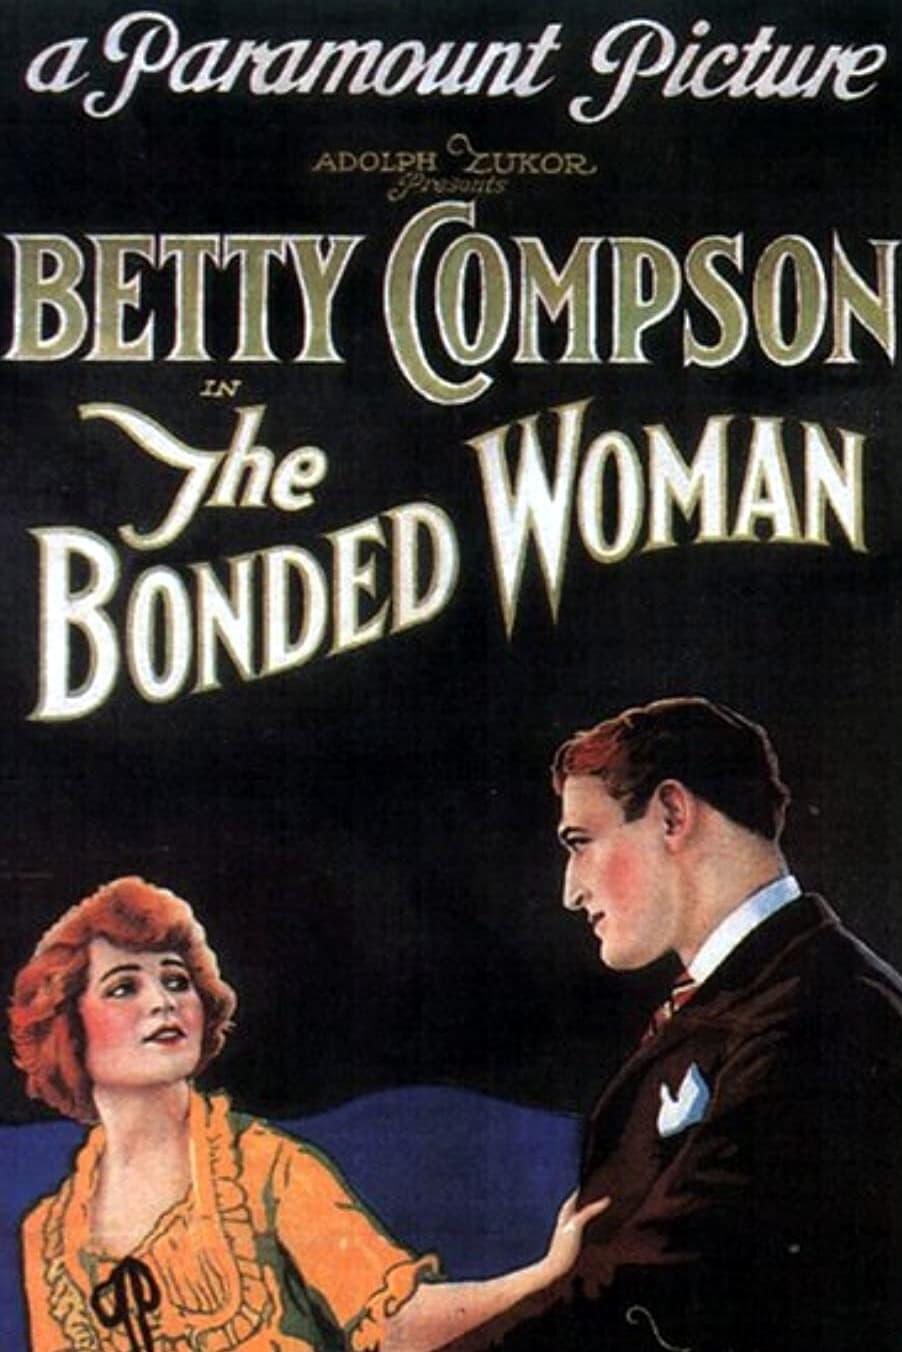 The Bonded Woman poster